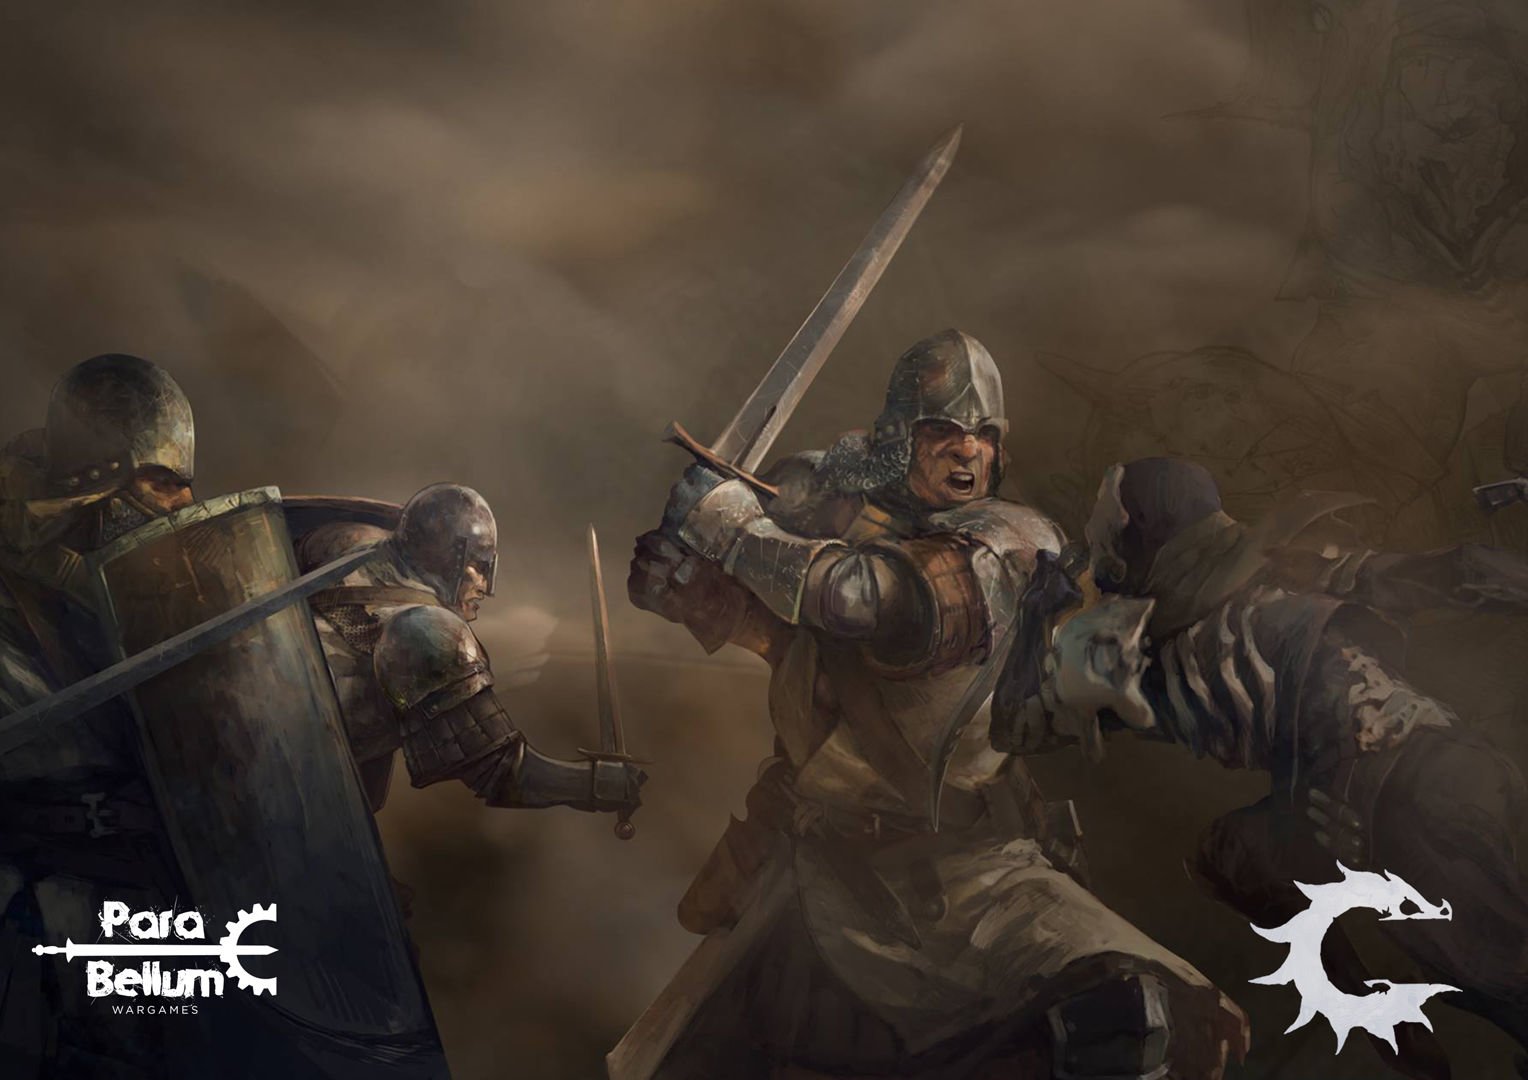 Strife is a way of life in the world of Conquest.  Image: Para Bellum Games